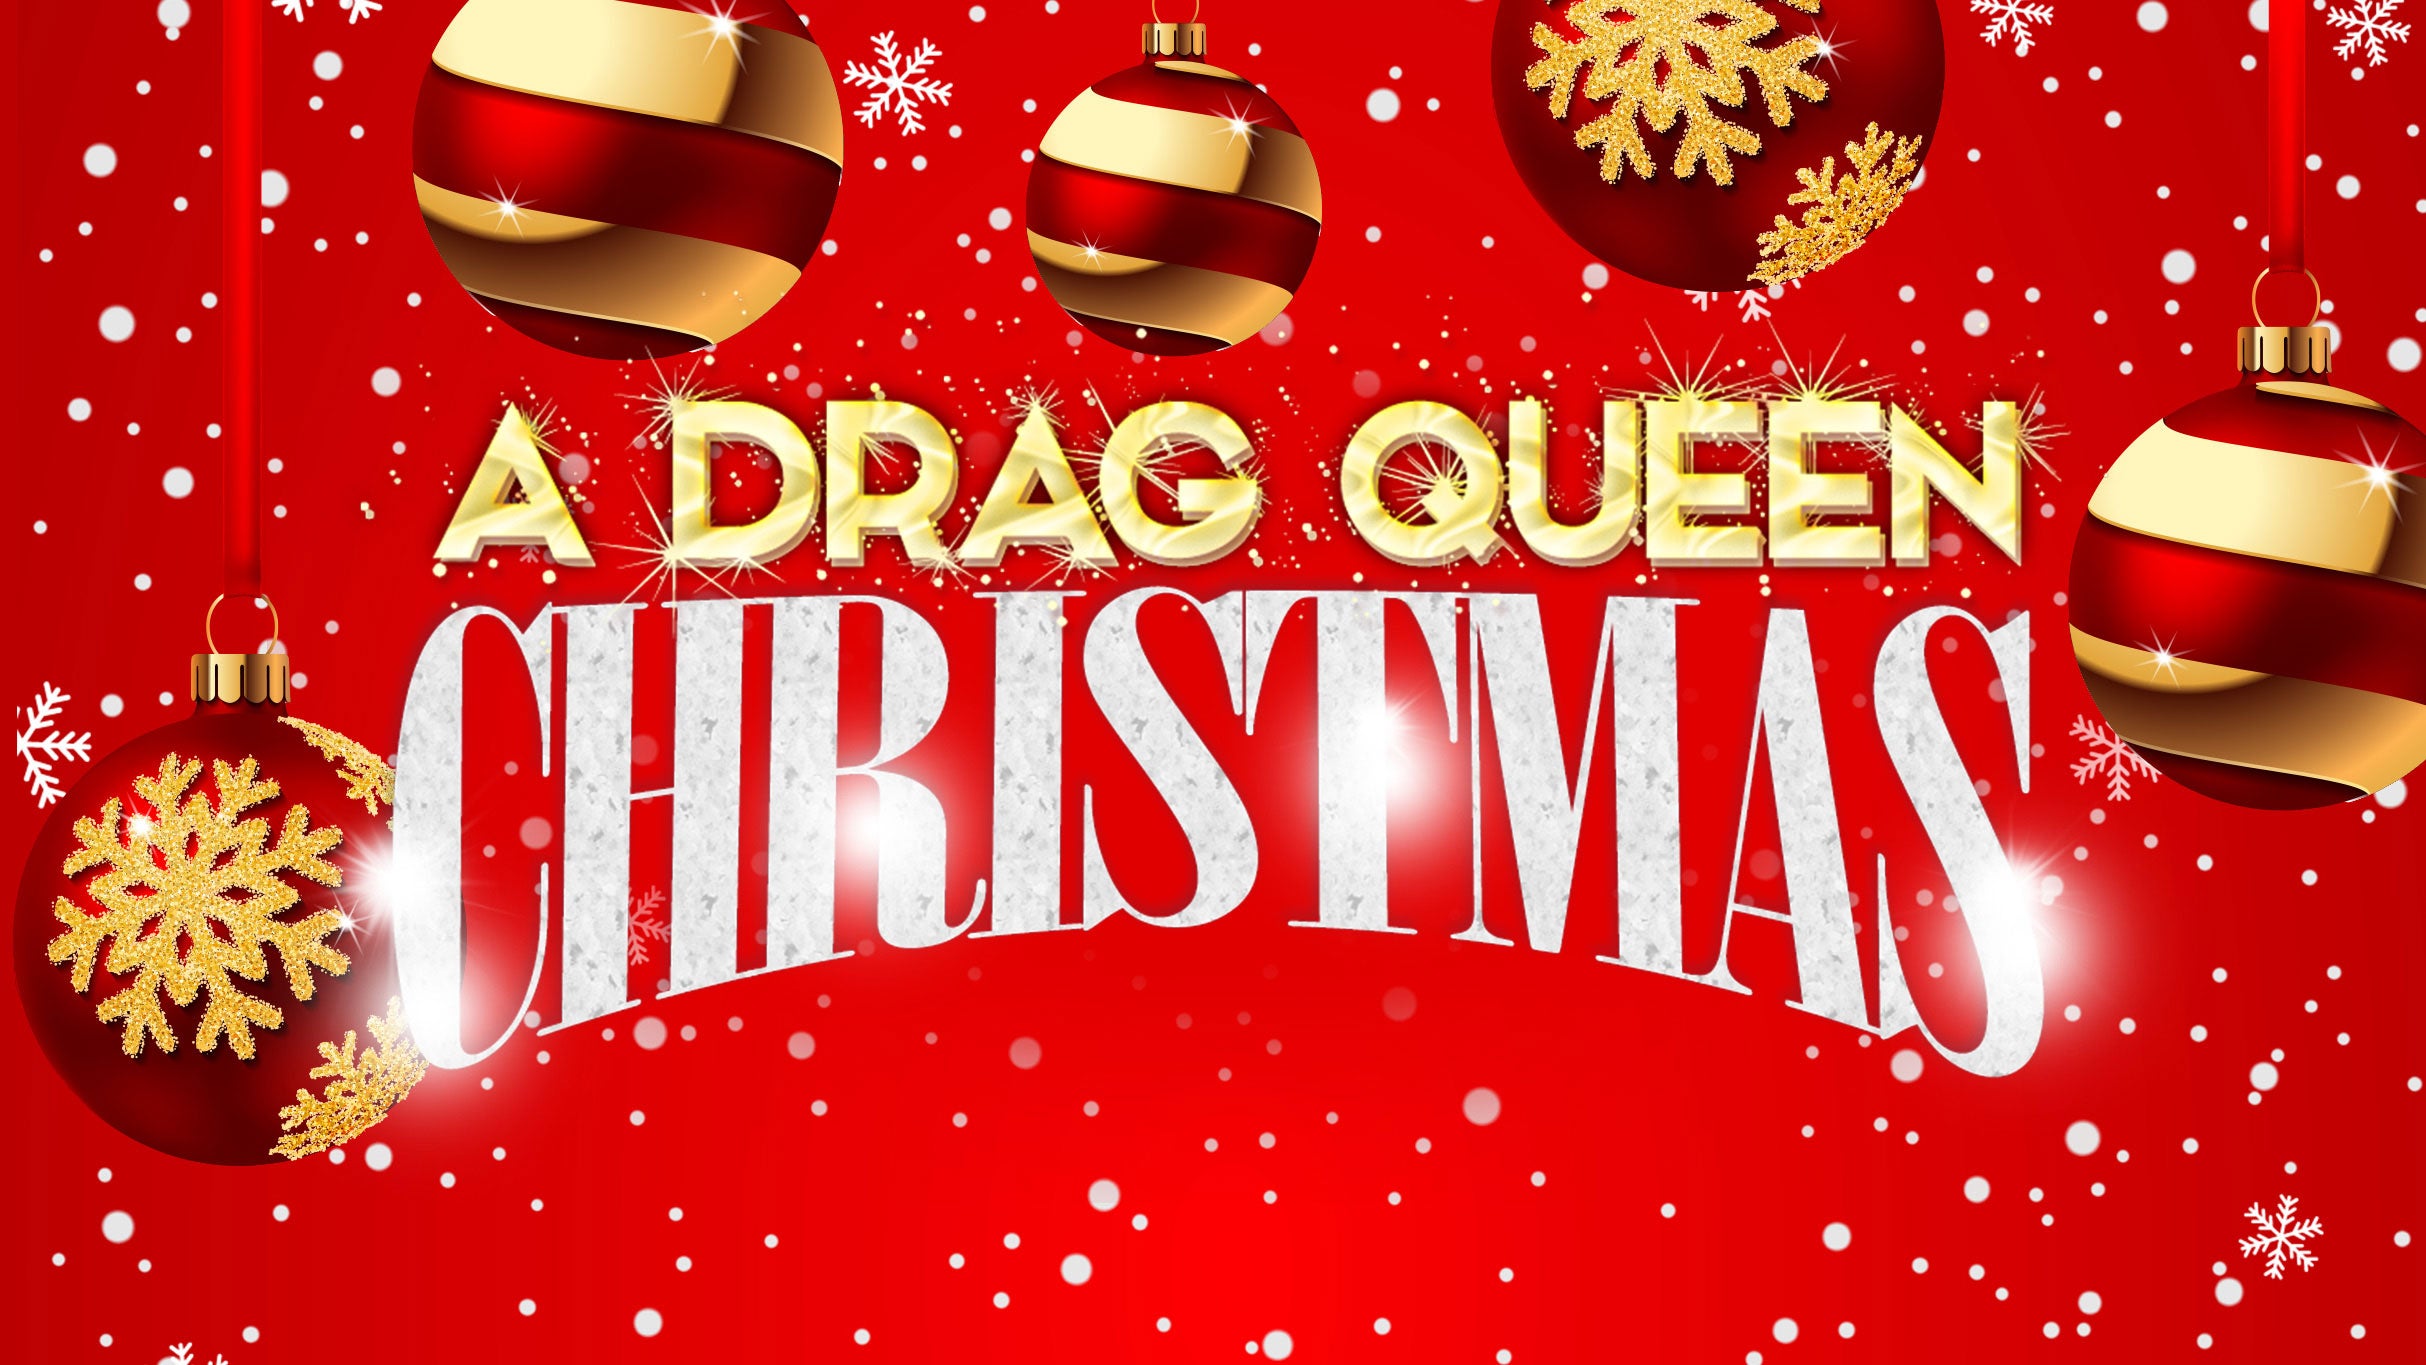 A Drag Queen Christmas 18+ Id Required presale password for advance tickets in San Antonio